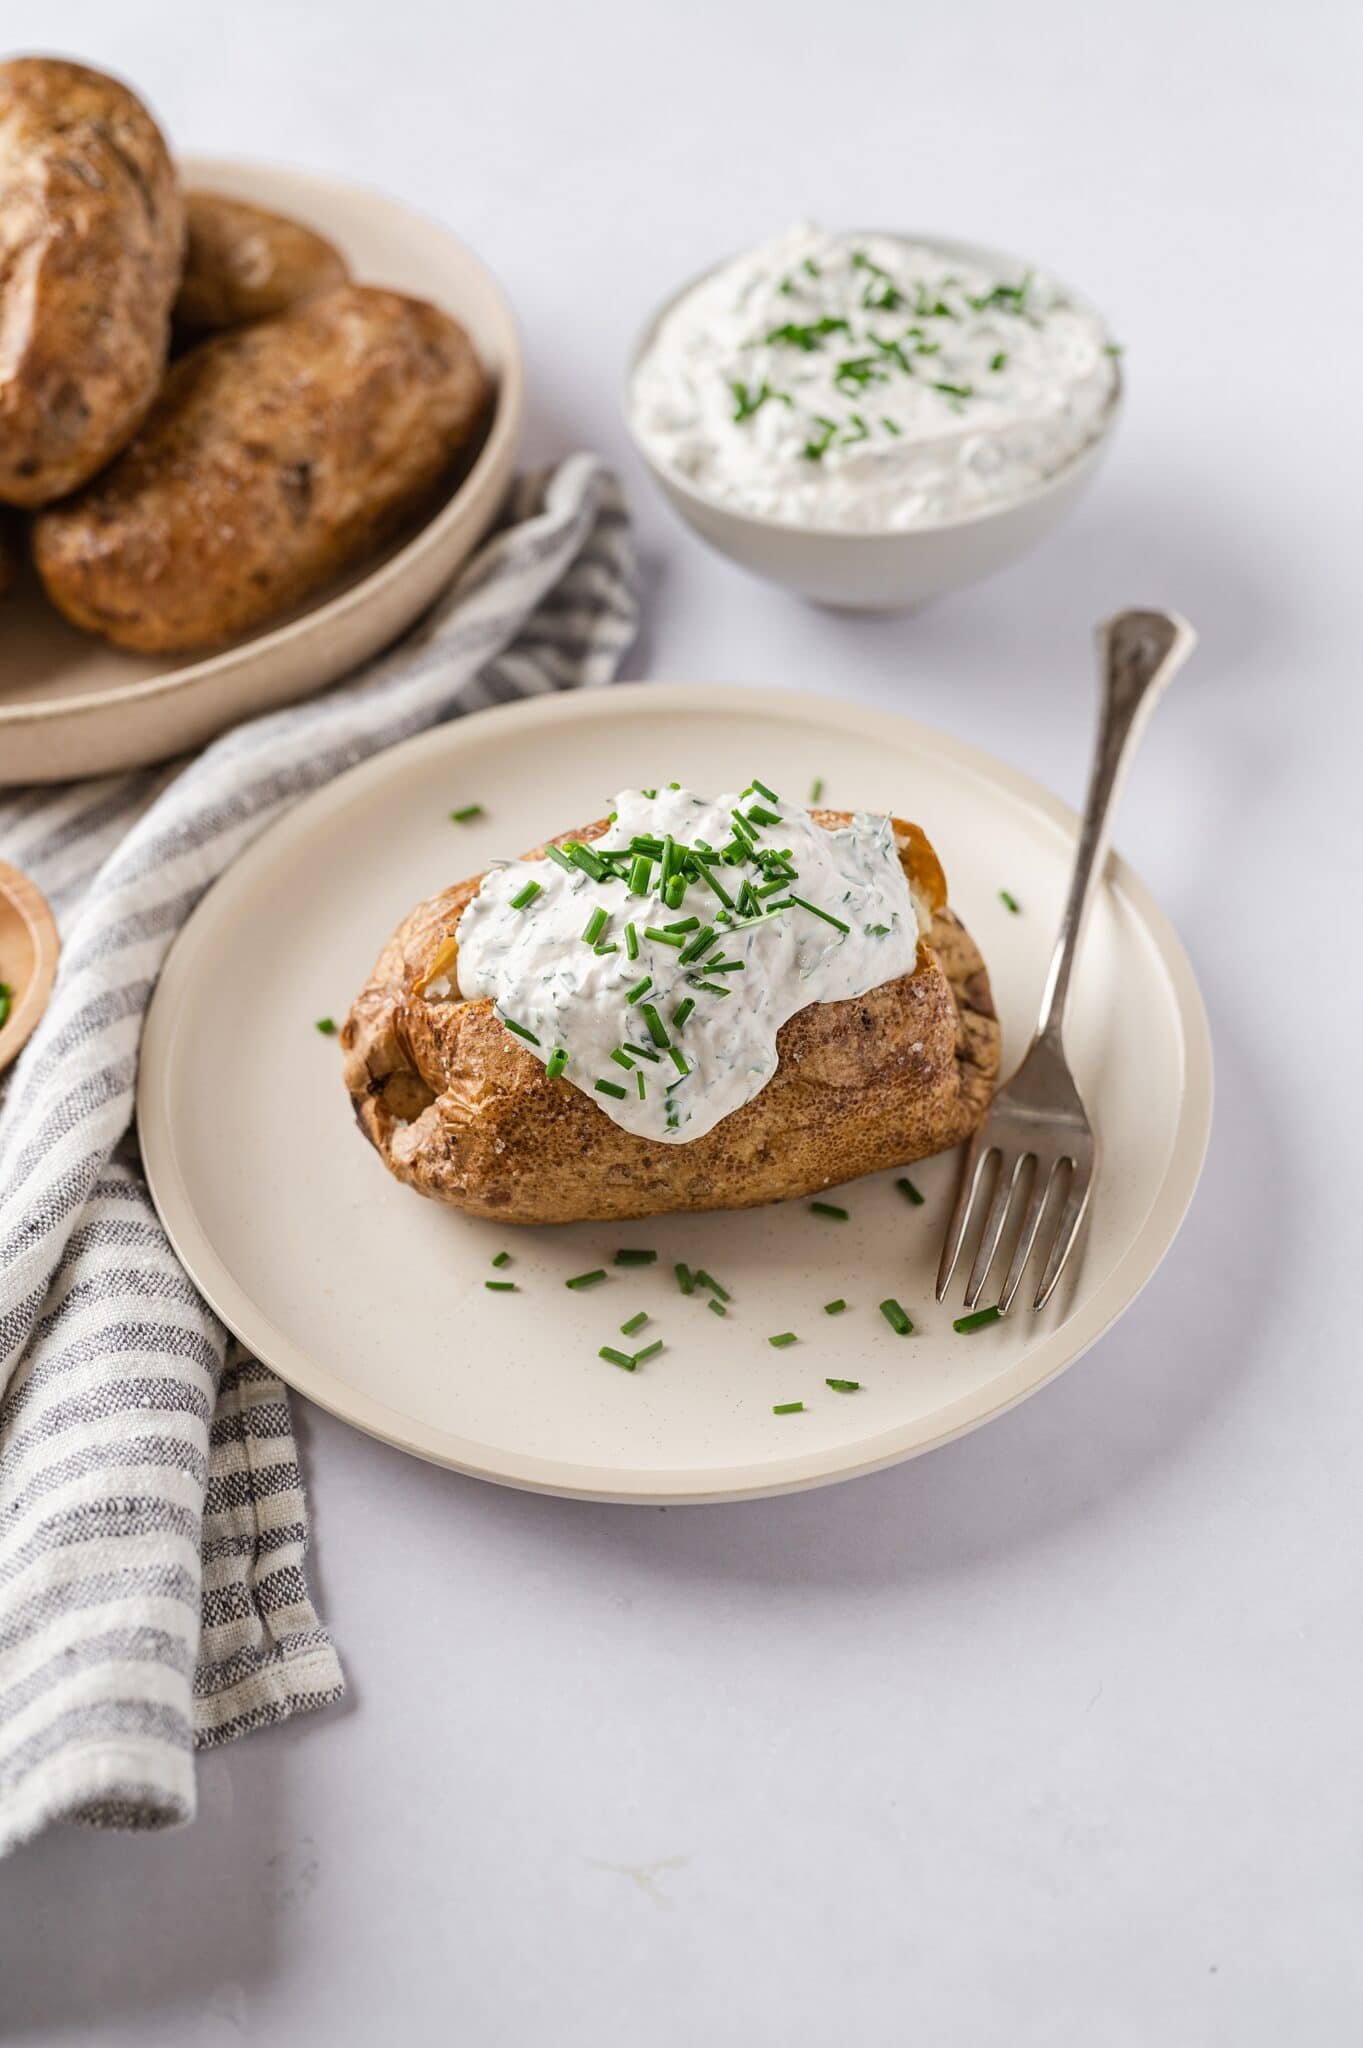 baked potato with sour cream and chives on a plate with baked potatoes, sour cream and chives in the background